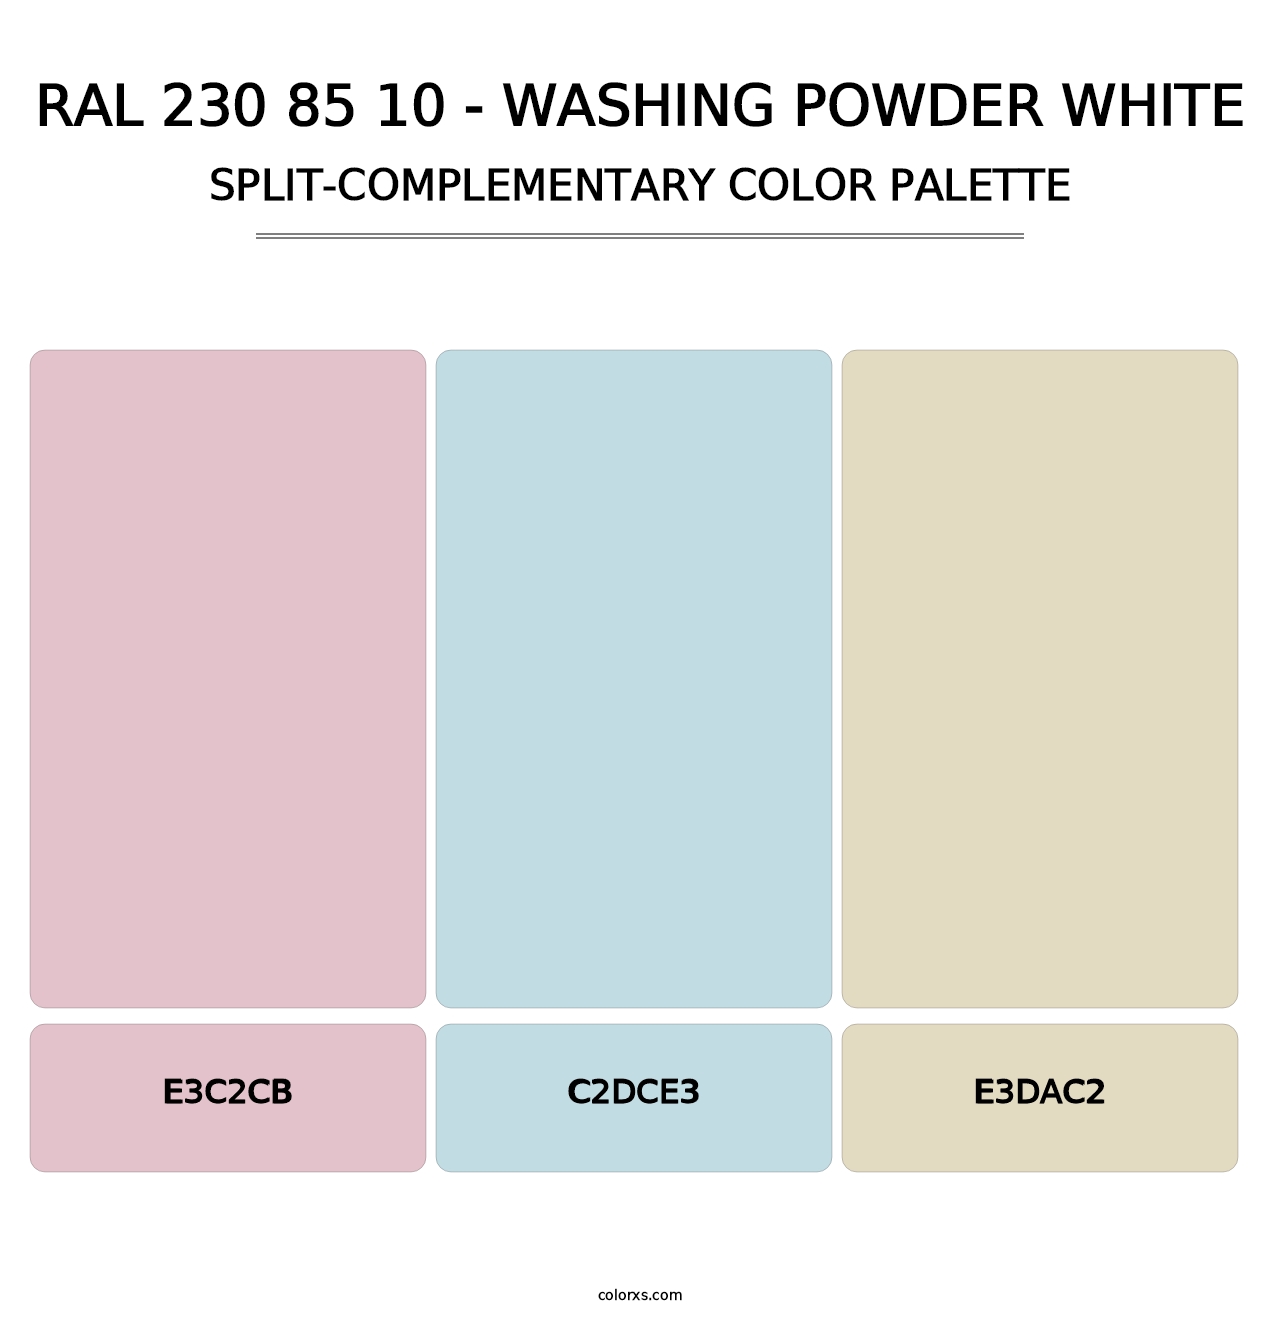 RAL 230 85 10 - Washing Powder White - Split-Complementary Color Palette